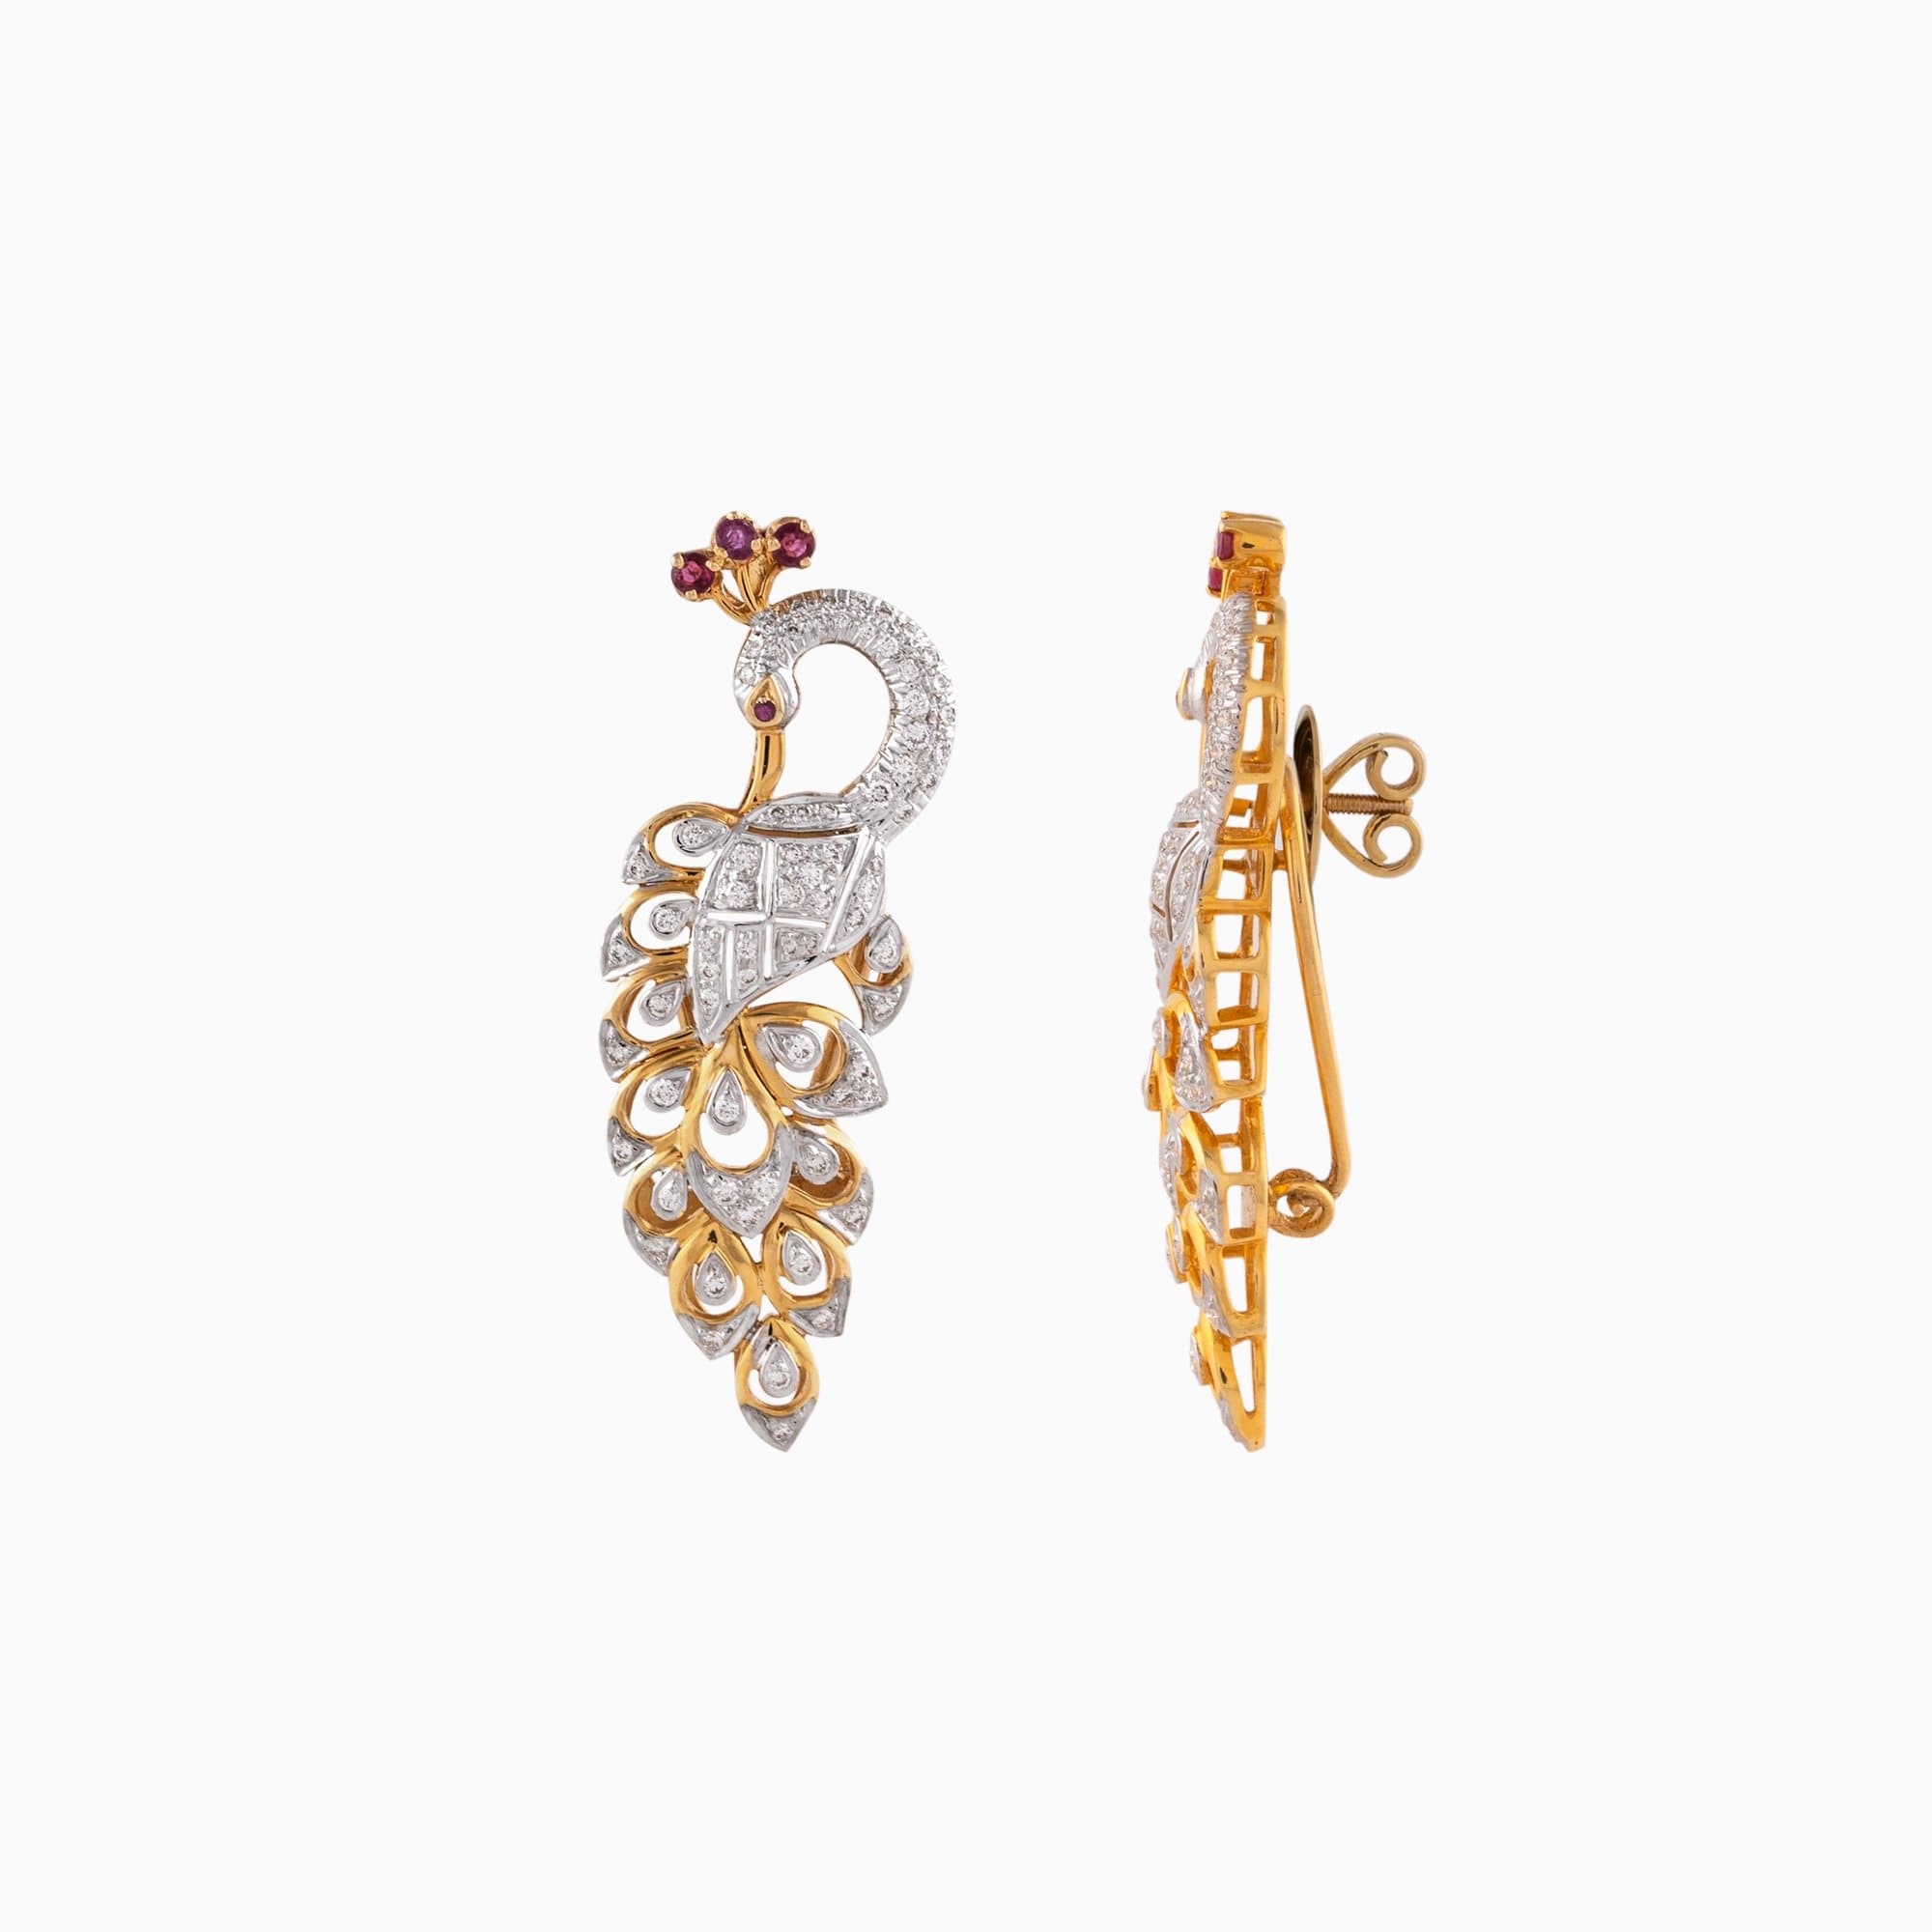 Earring pair with Round Cut Diamond and Round Cut Ruby (Peacock Design) - GDNE0413